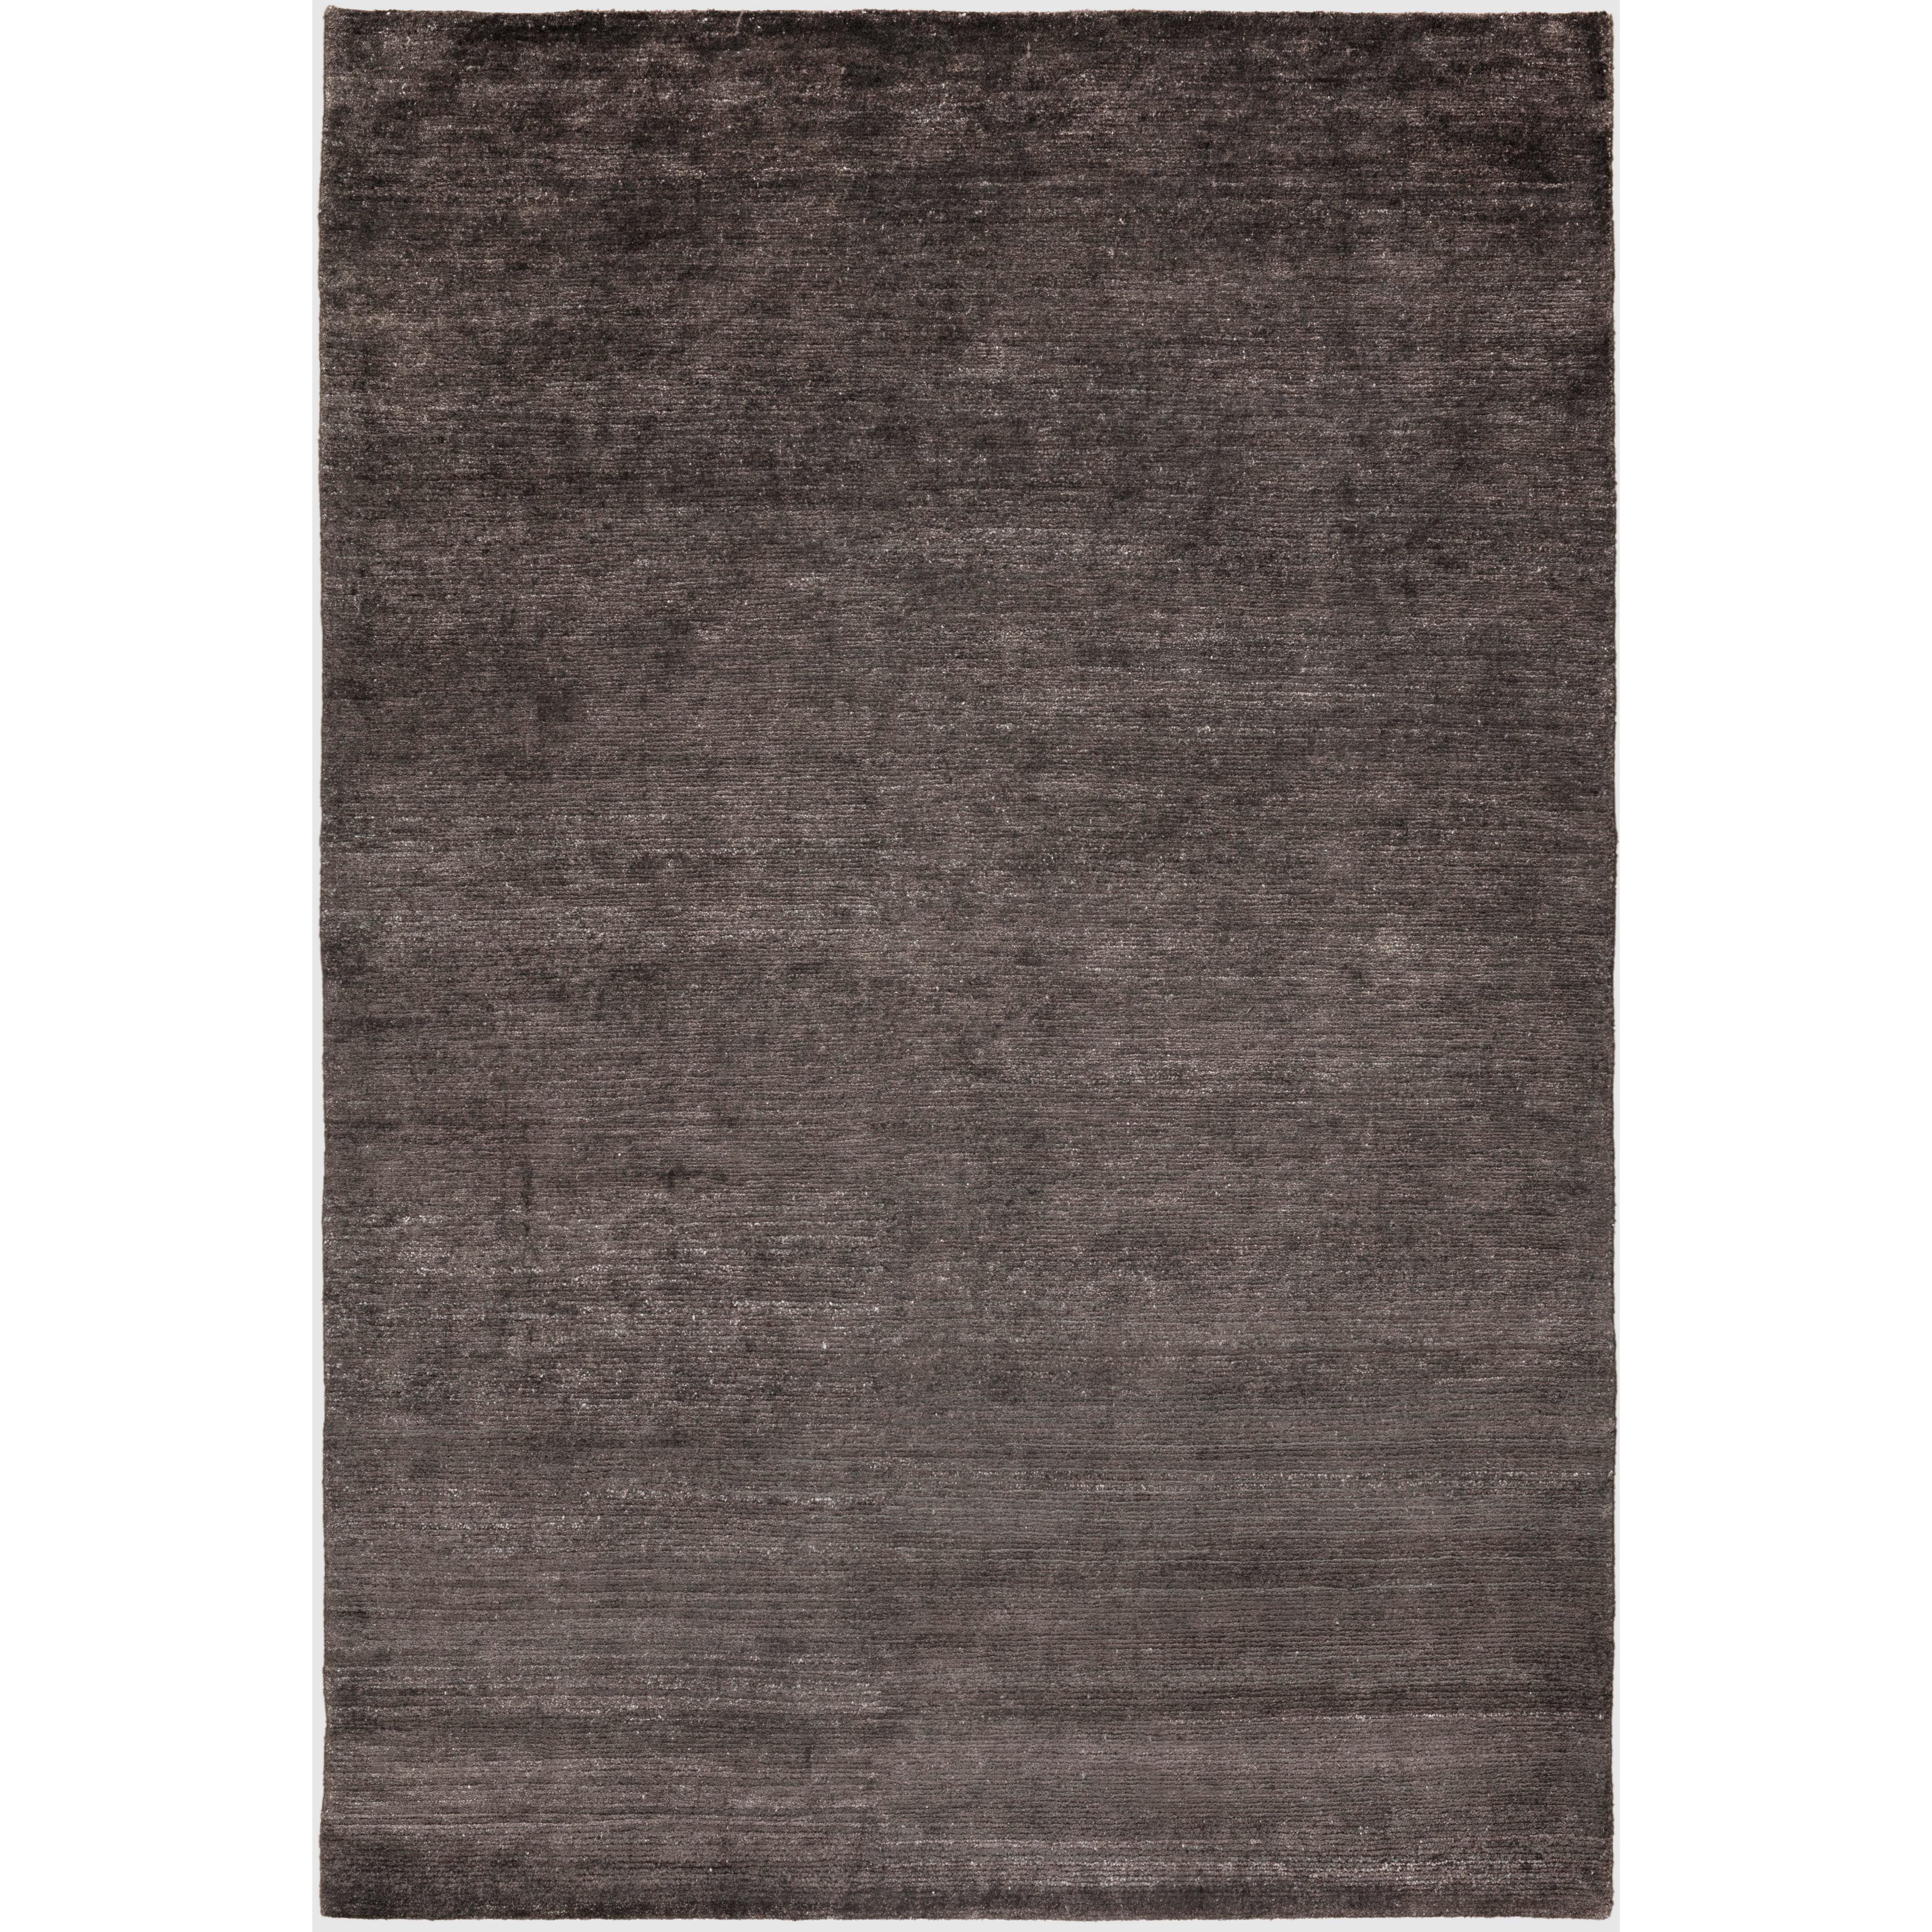 Bamboo Silk Graphite Hand-Knotted 10x8 Rug in Bamboo Silk by The Rug Company